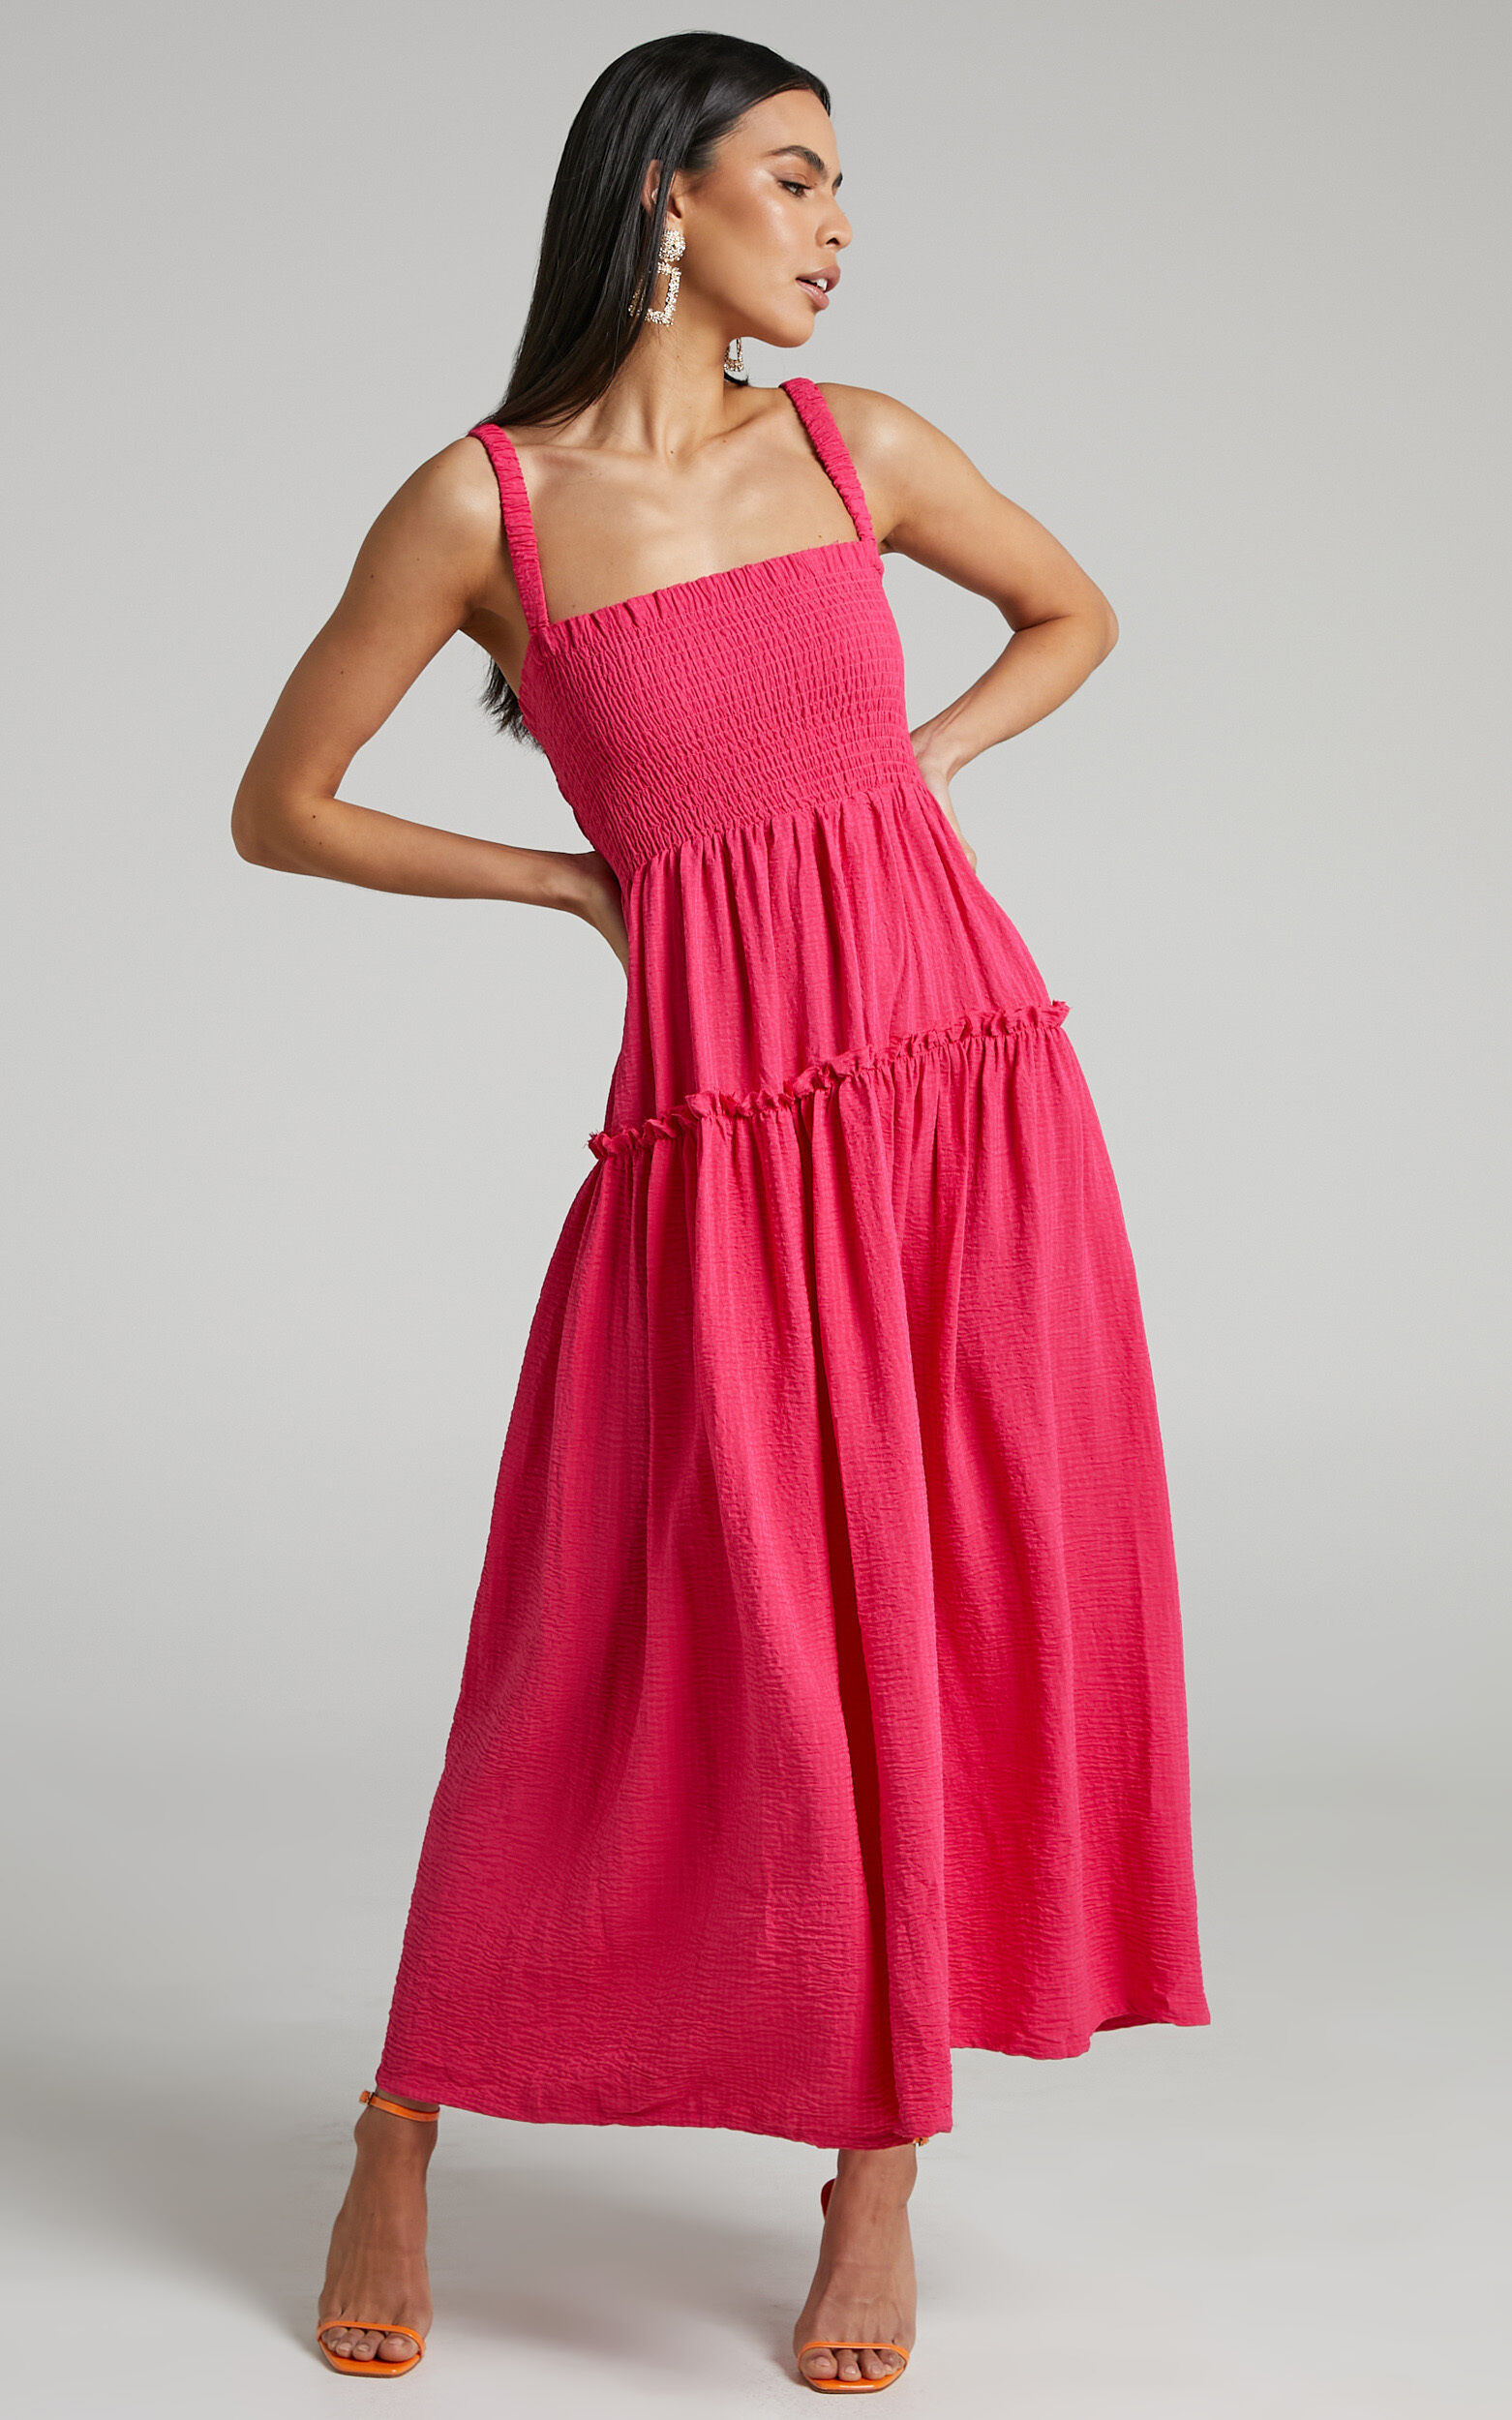 Khayeen Shirred Bodice Maxi Dress in Pink - 04, PNK1, super-hi-res image number null